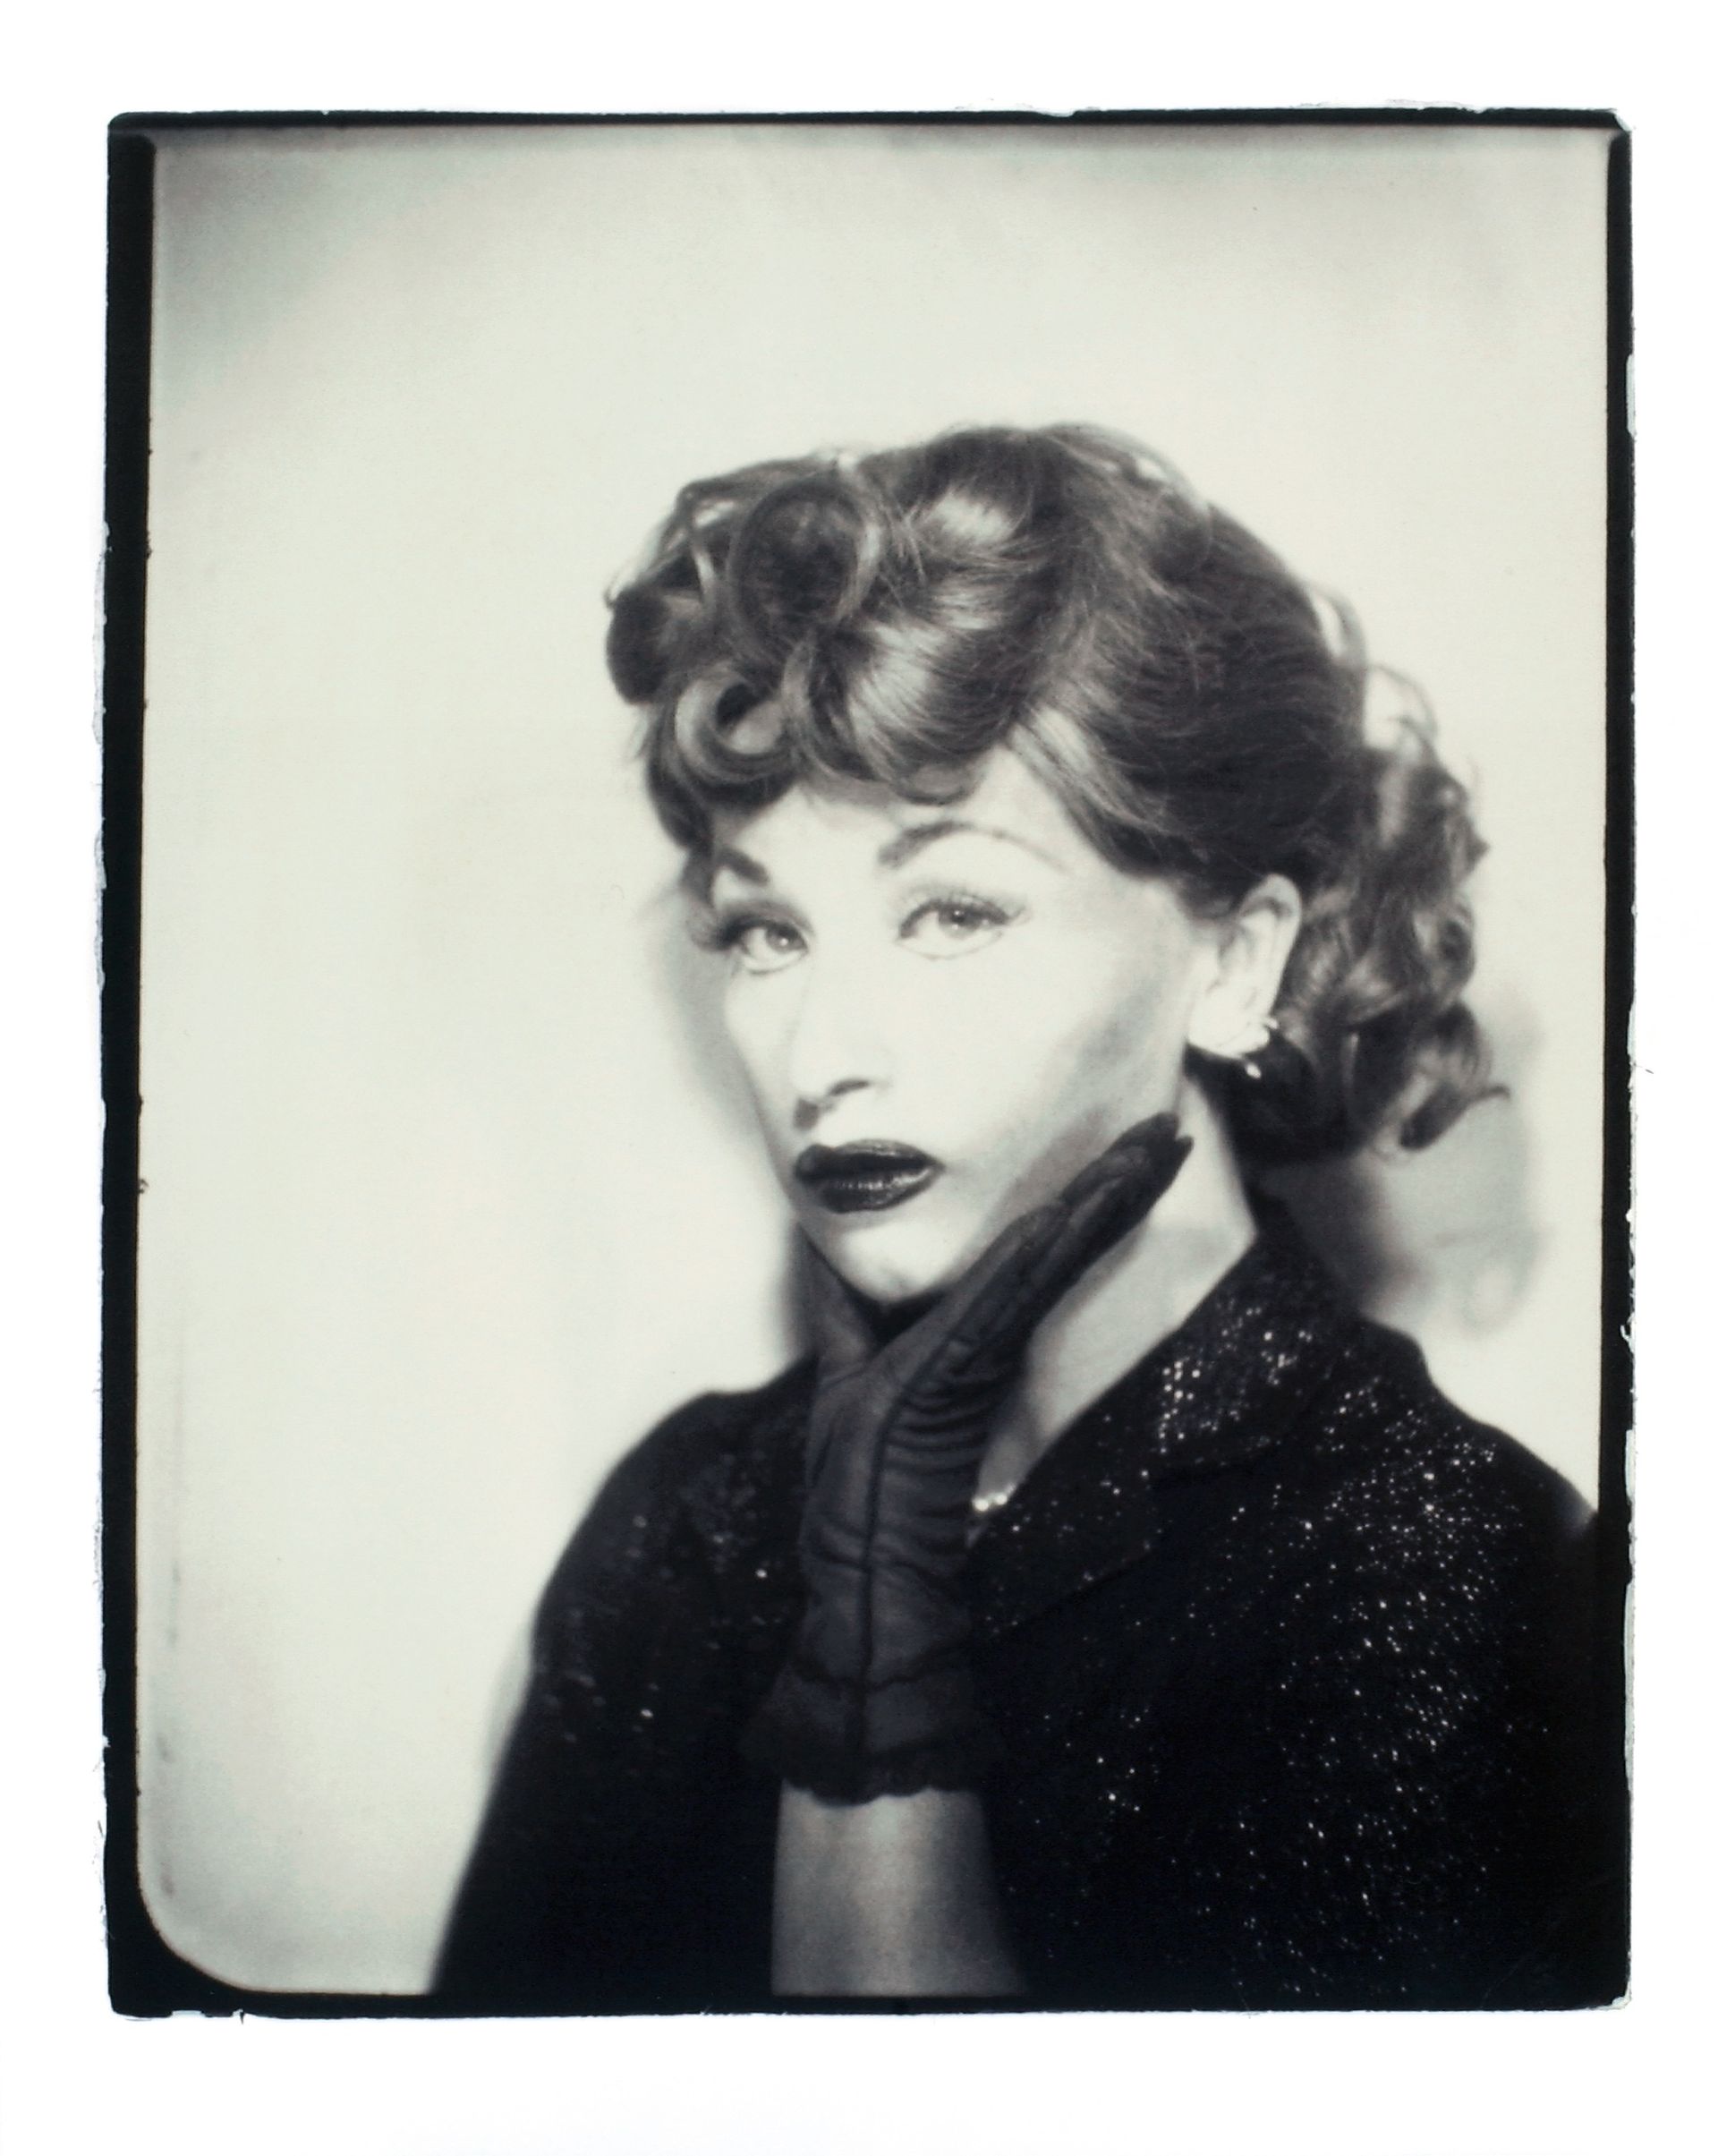 Cindy Sherman, Untitled (Lucille Ball), 1975/2001, gelatin silver print
Image © Cindy Sherman. Courtesy the artist and Hauser & Wirth.
From the Collection of Gerald Mead.